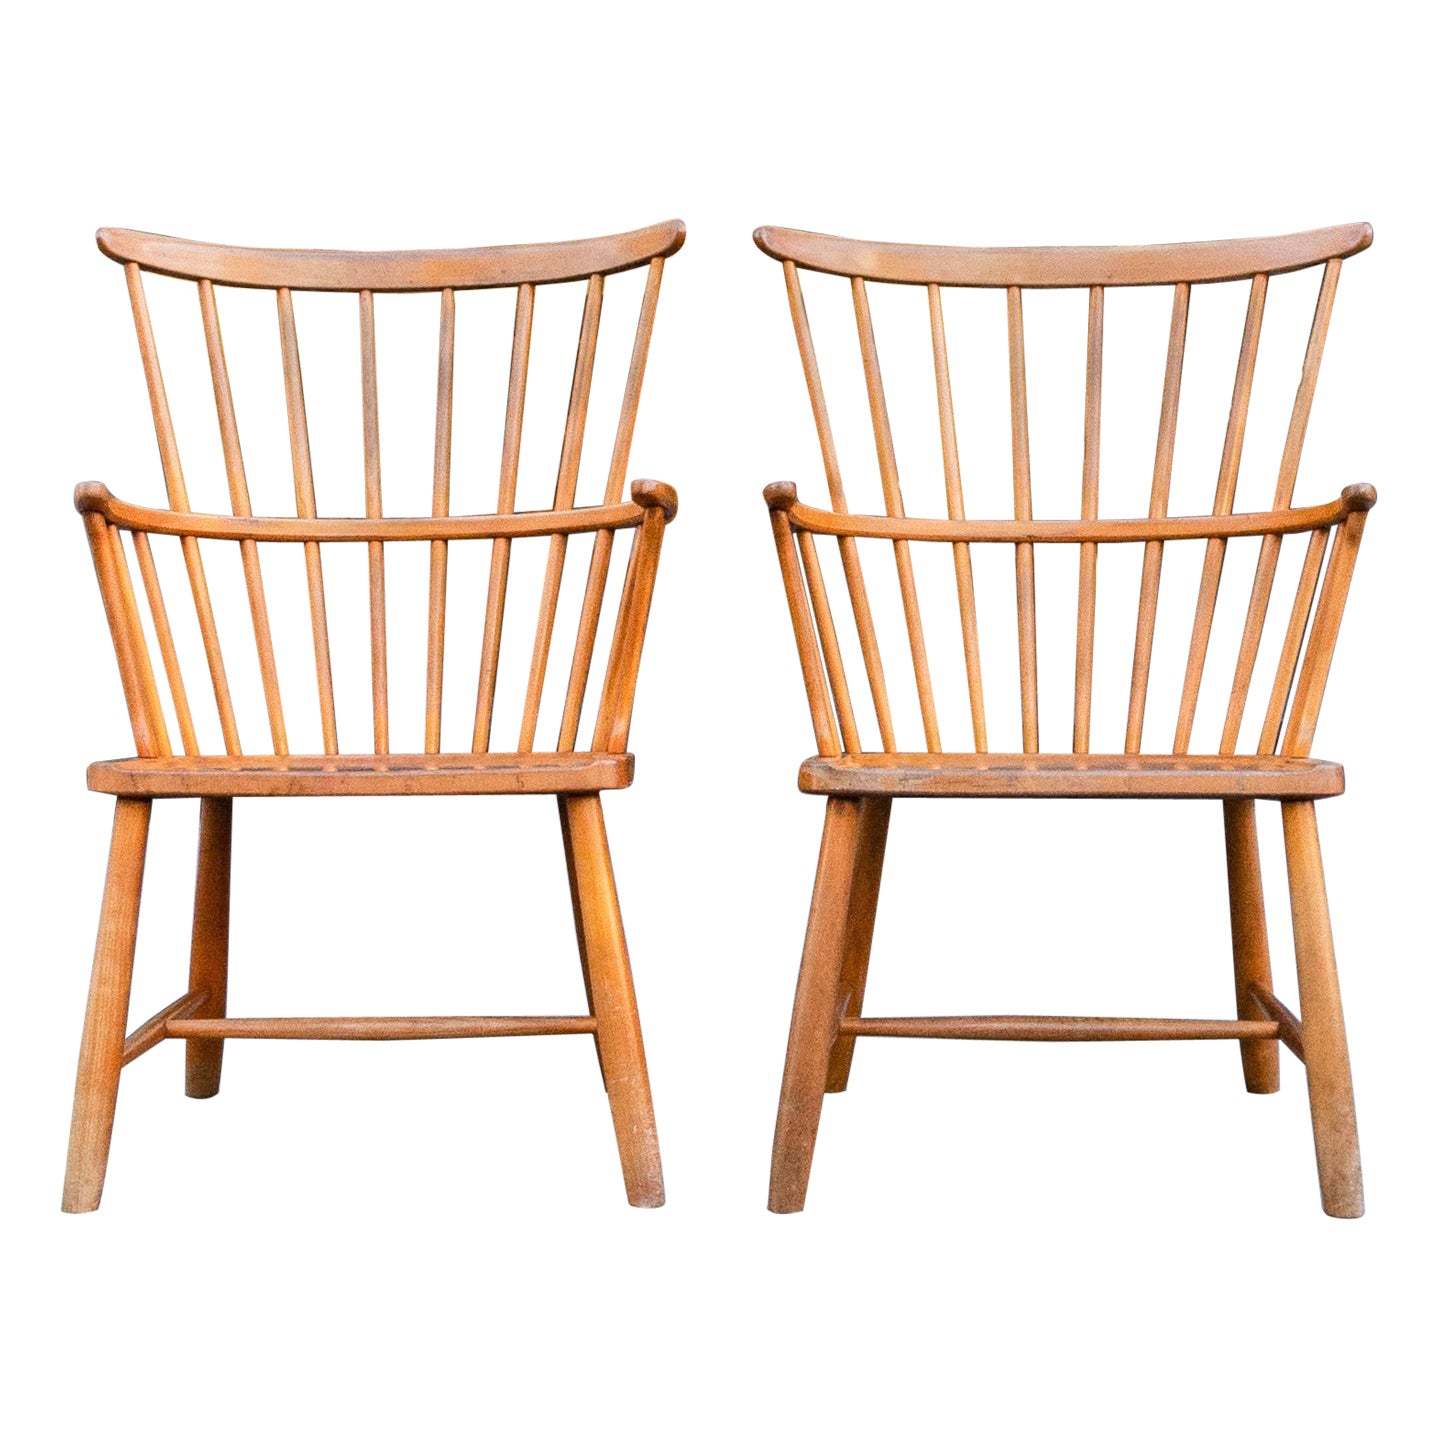 Pair of Windsor Chairs by Ove Boldt, 1947